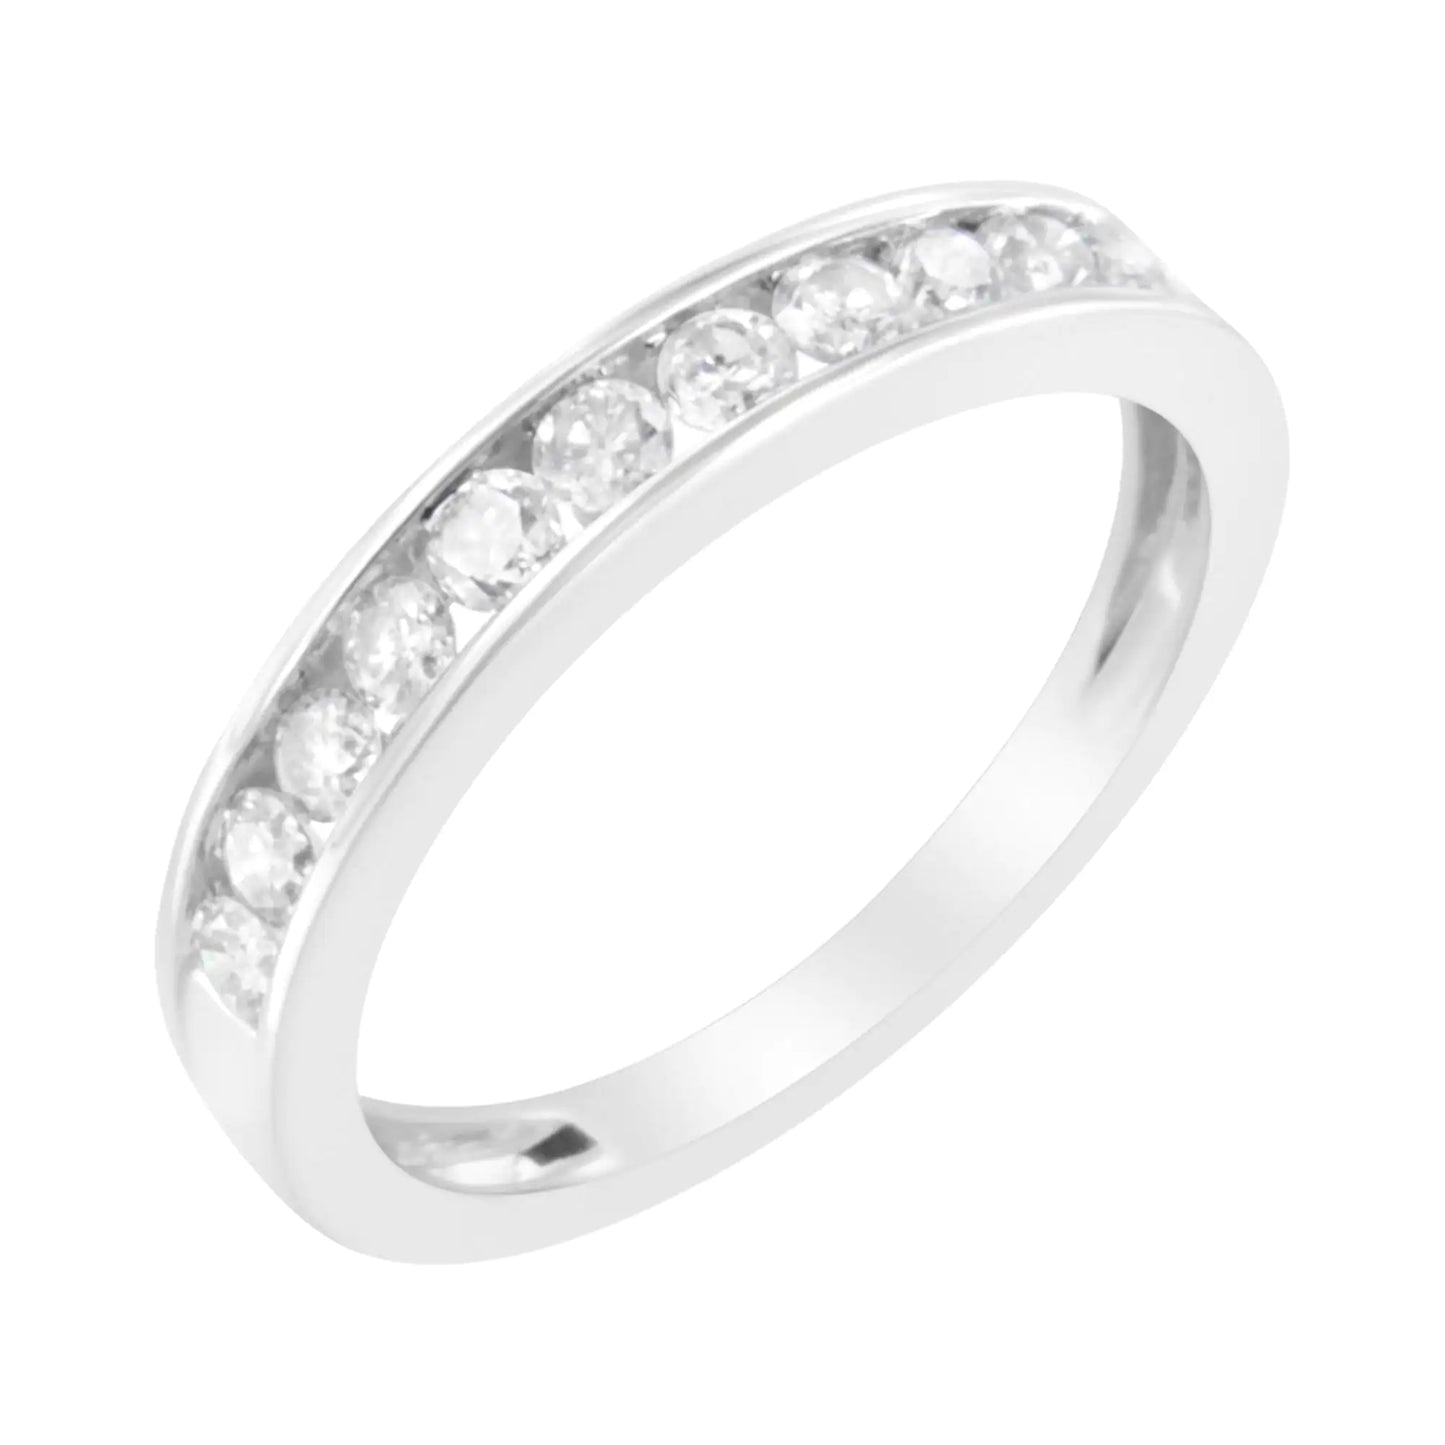 IGI Certified 1/2 Cttw Diamond 10K White Gold Channel Set Band Style Ring (J-K Color, I2-I3 Clarity)